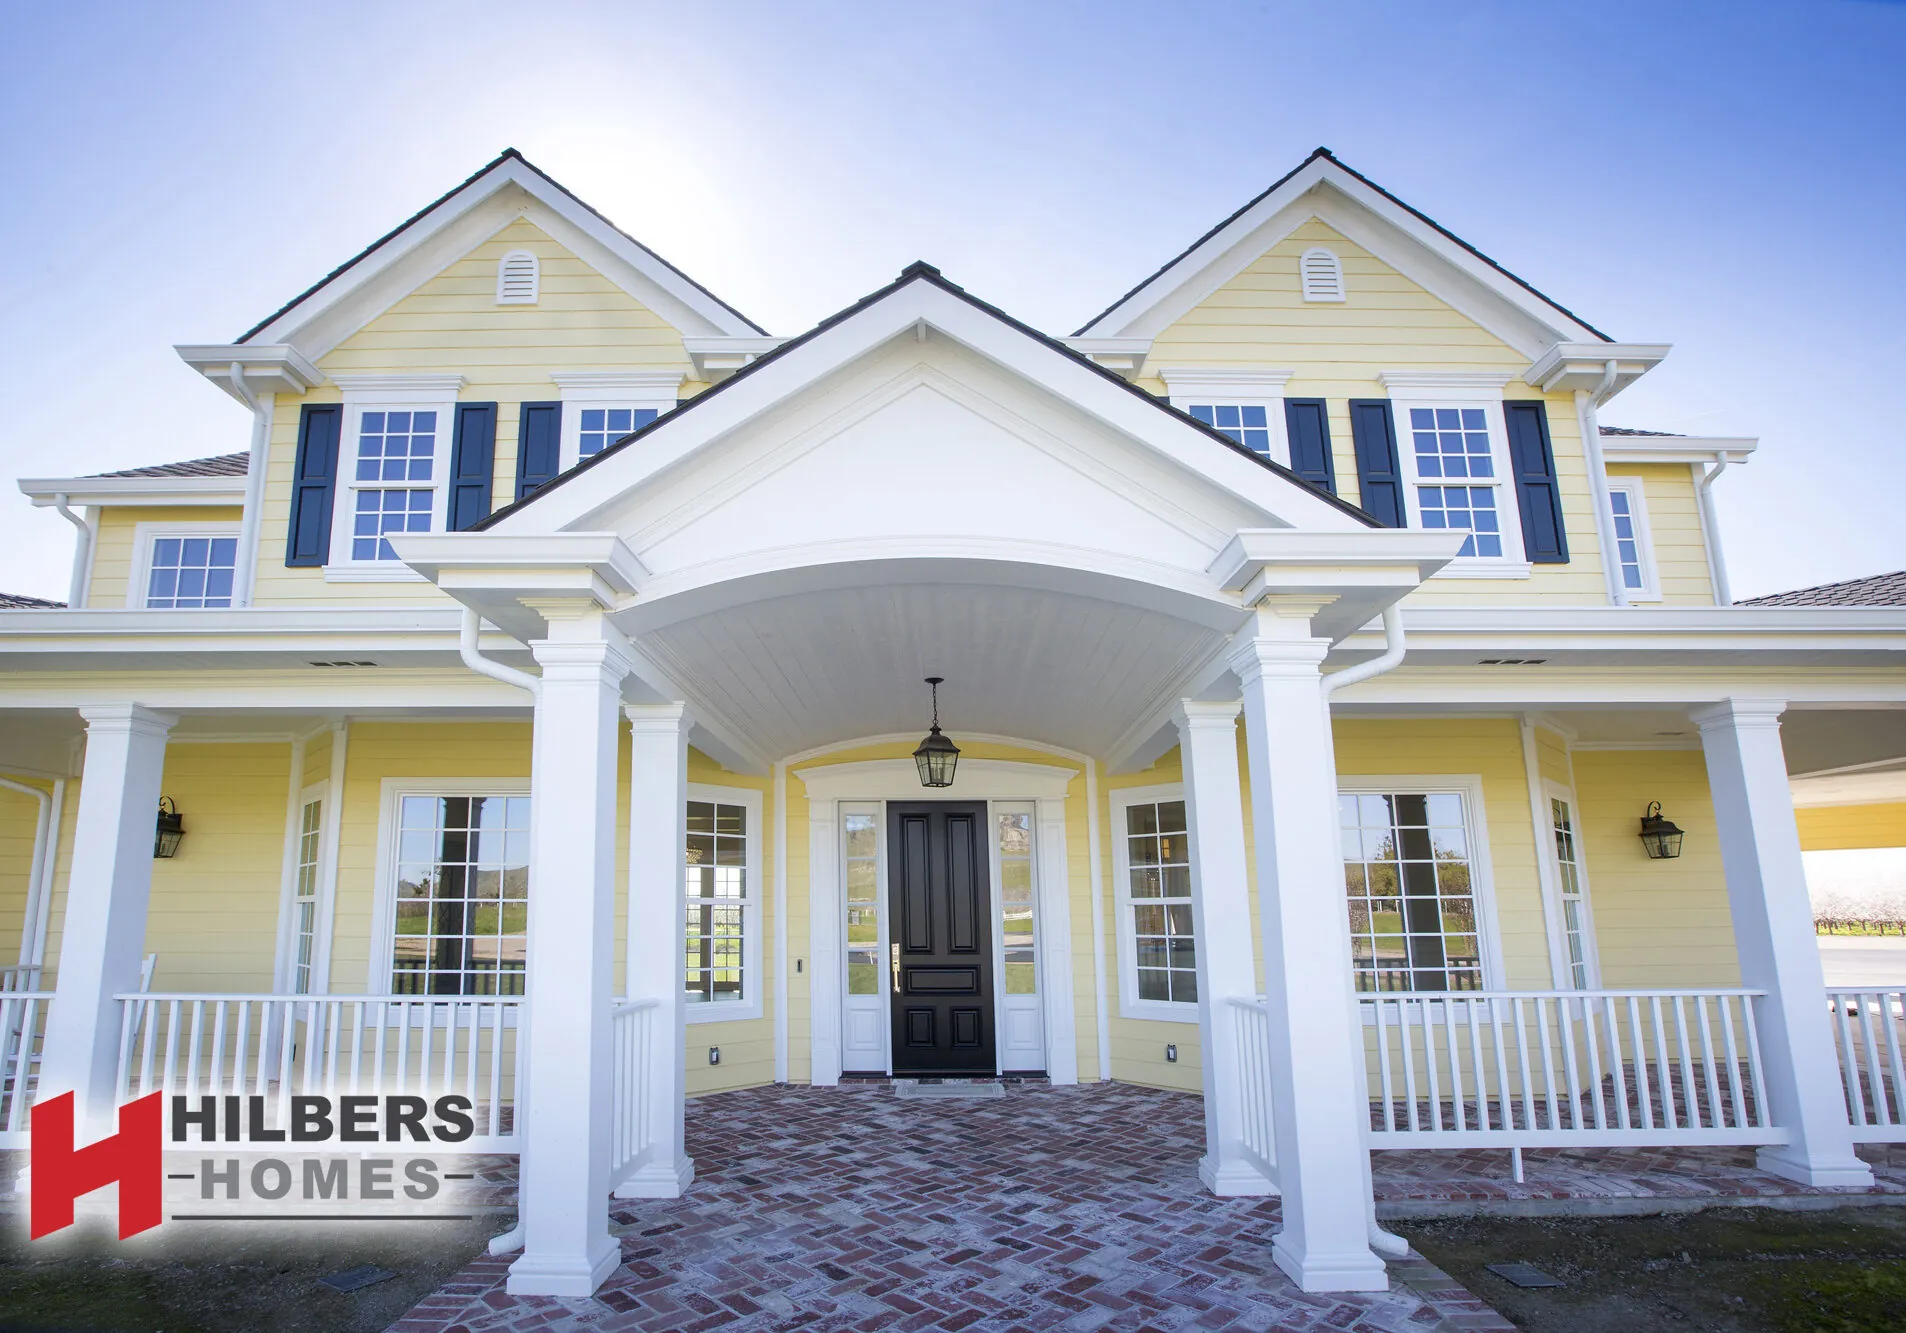 Hilbers New Homes | Home Remodeling Contractor | Hilbers Inc. | Custom Home Builder